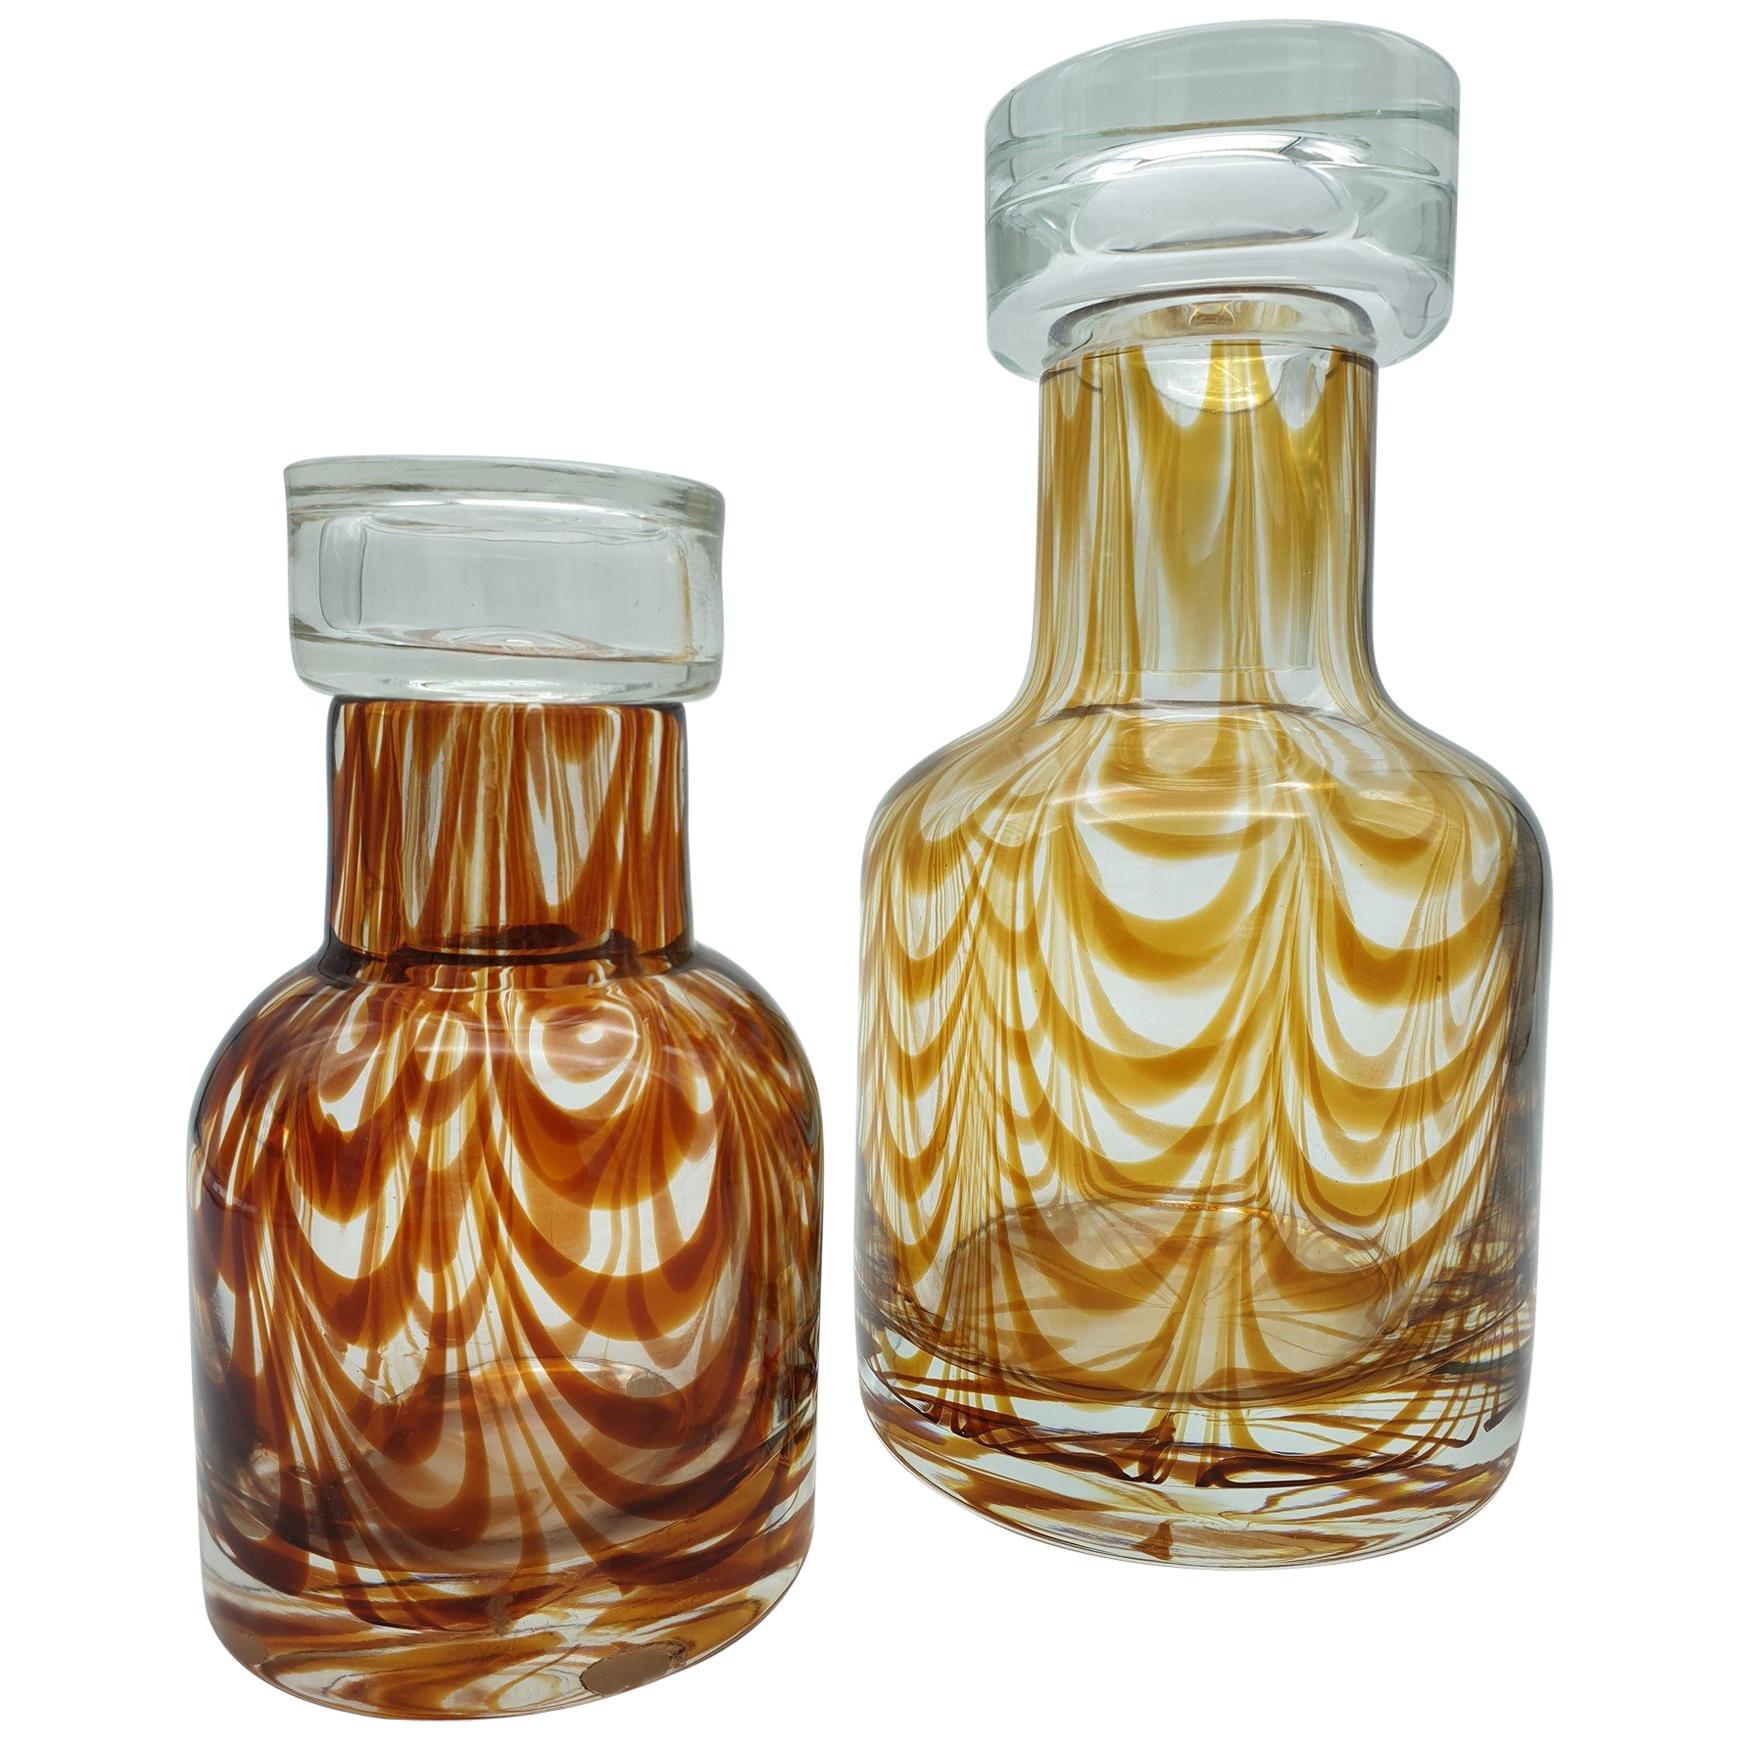 Pair of Modern Murano Glass Vases in Amber "Fenicio" Pattern by Cenedese, 1970s